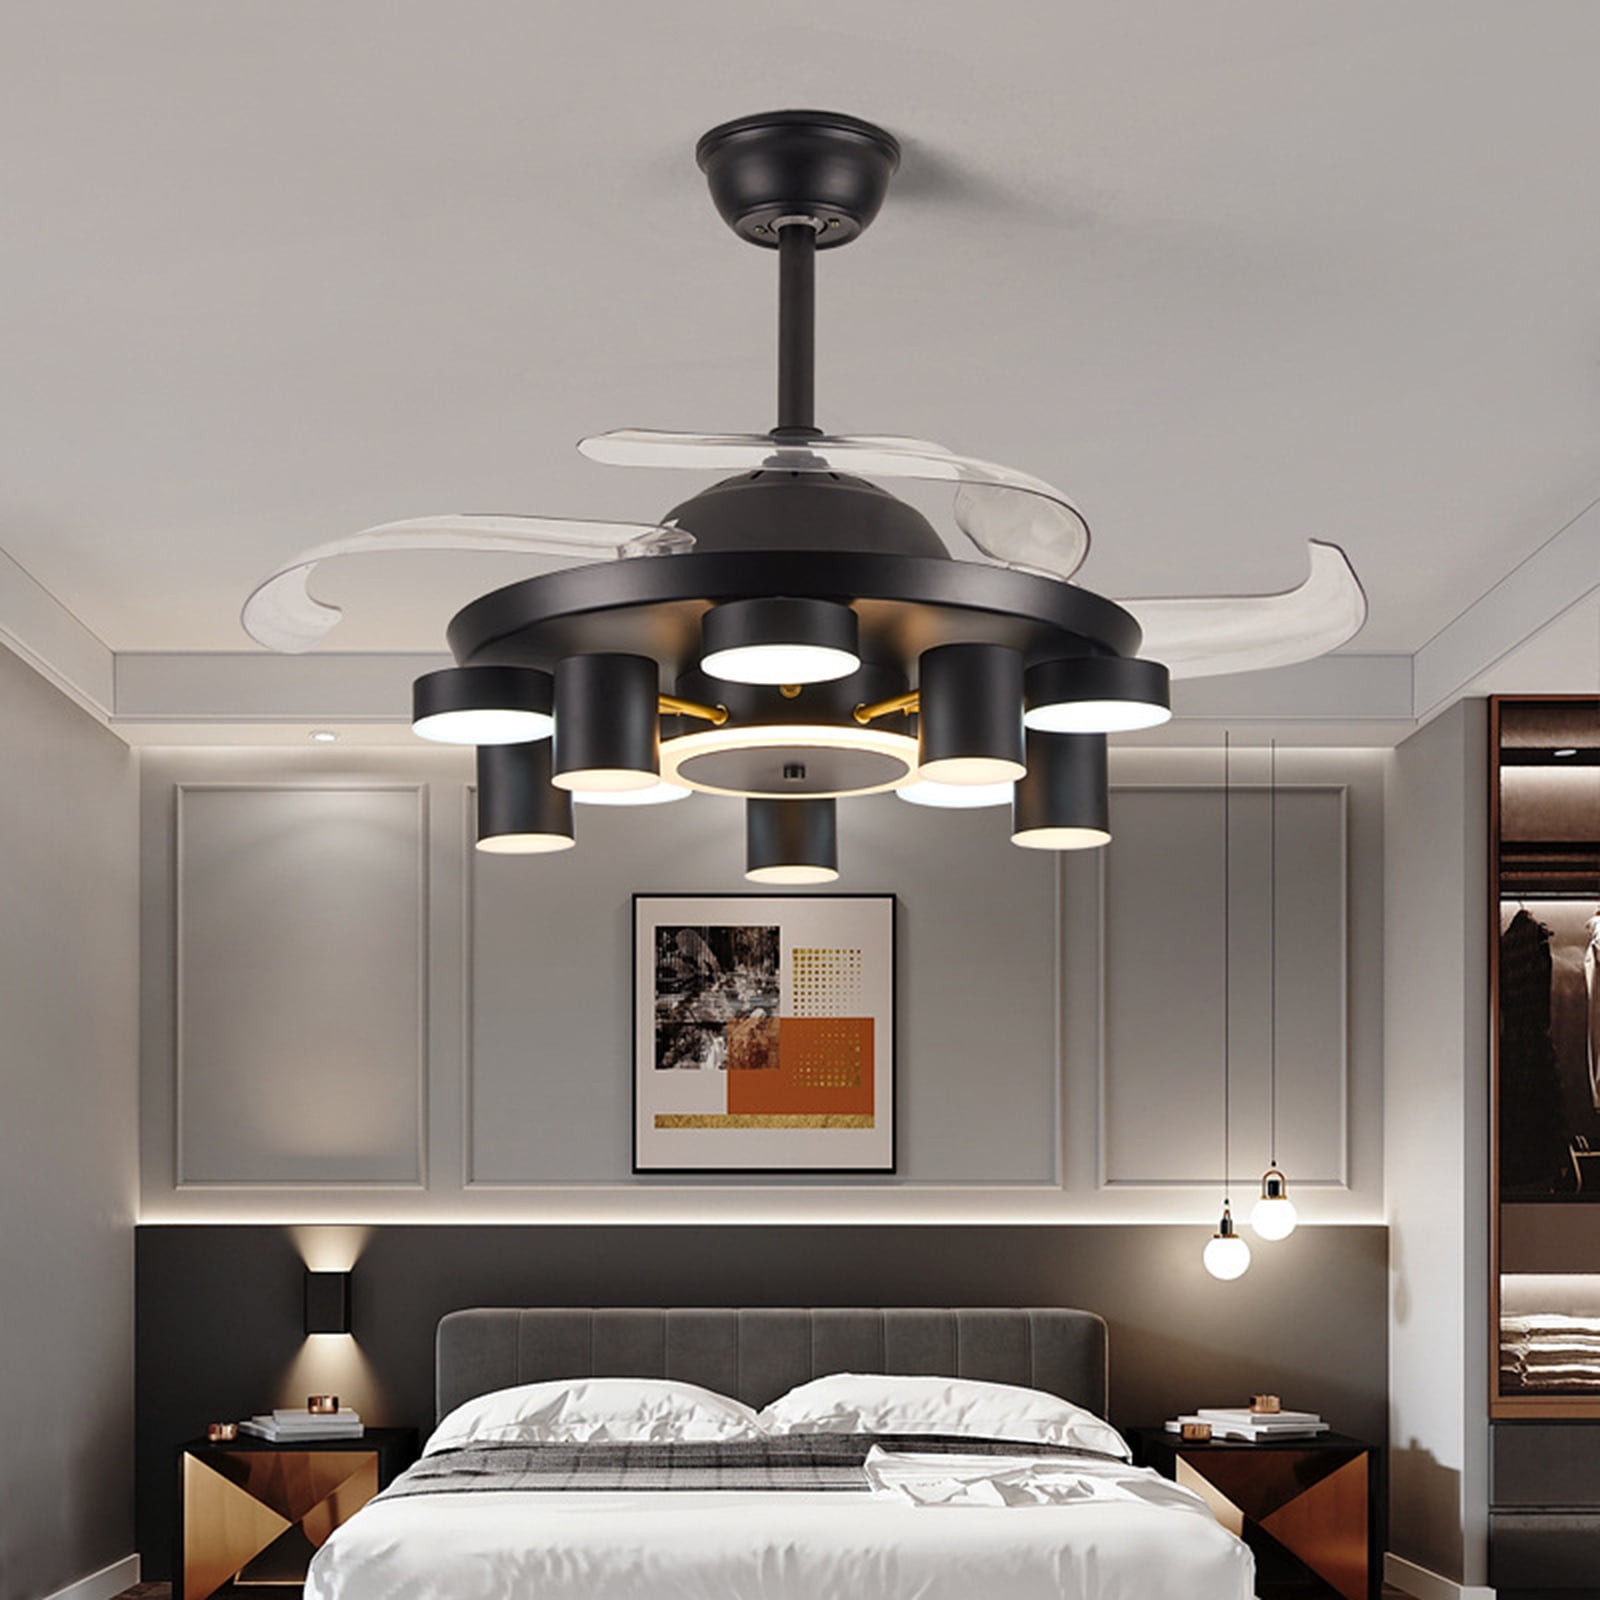 Details about   42" Bluetooth Invisible Fan LED Ceiling Light Music Player Chandelier+Remote US 